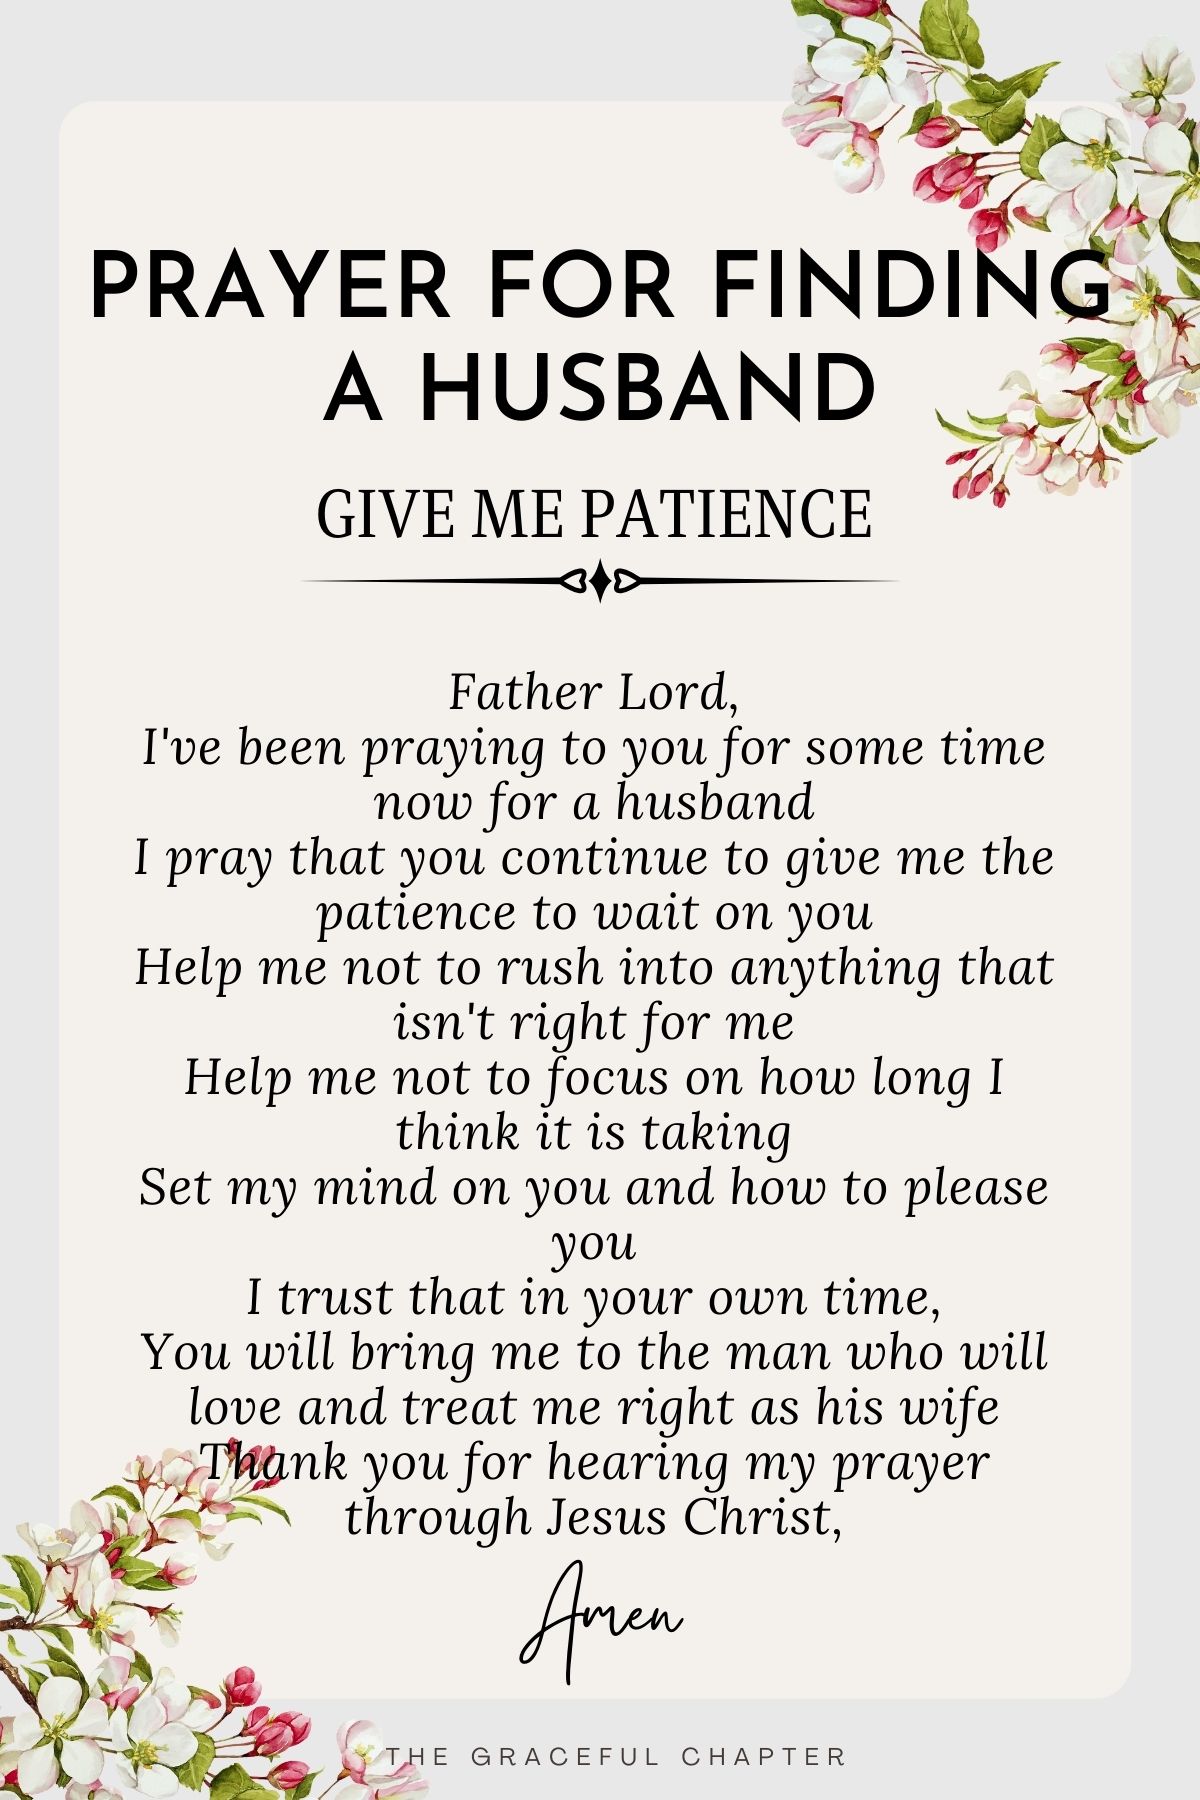 Prayer for finding a husband - Give me patience